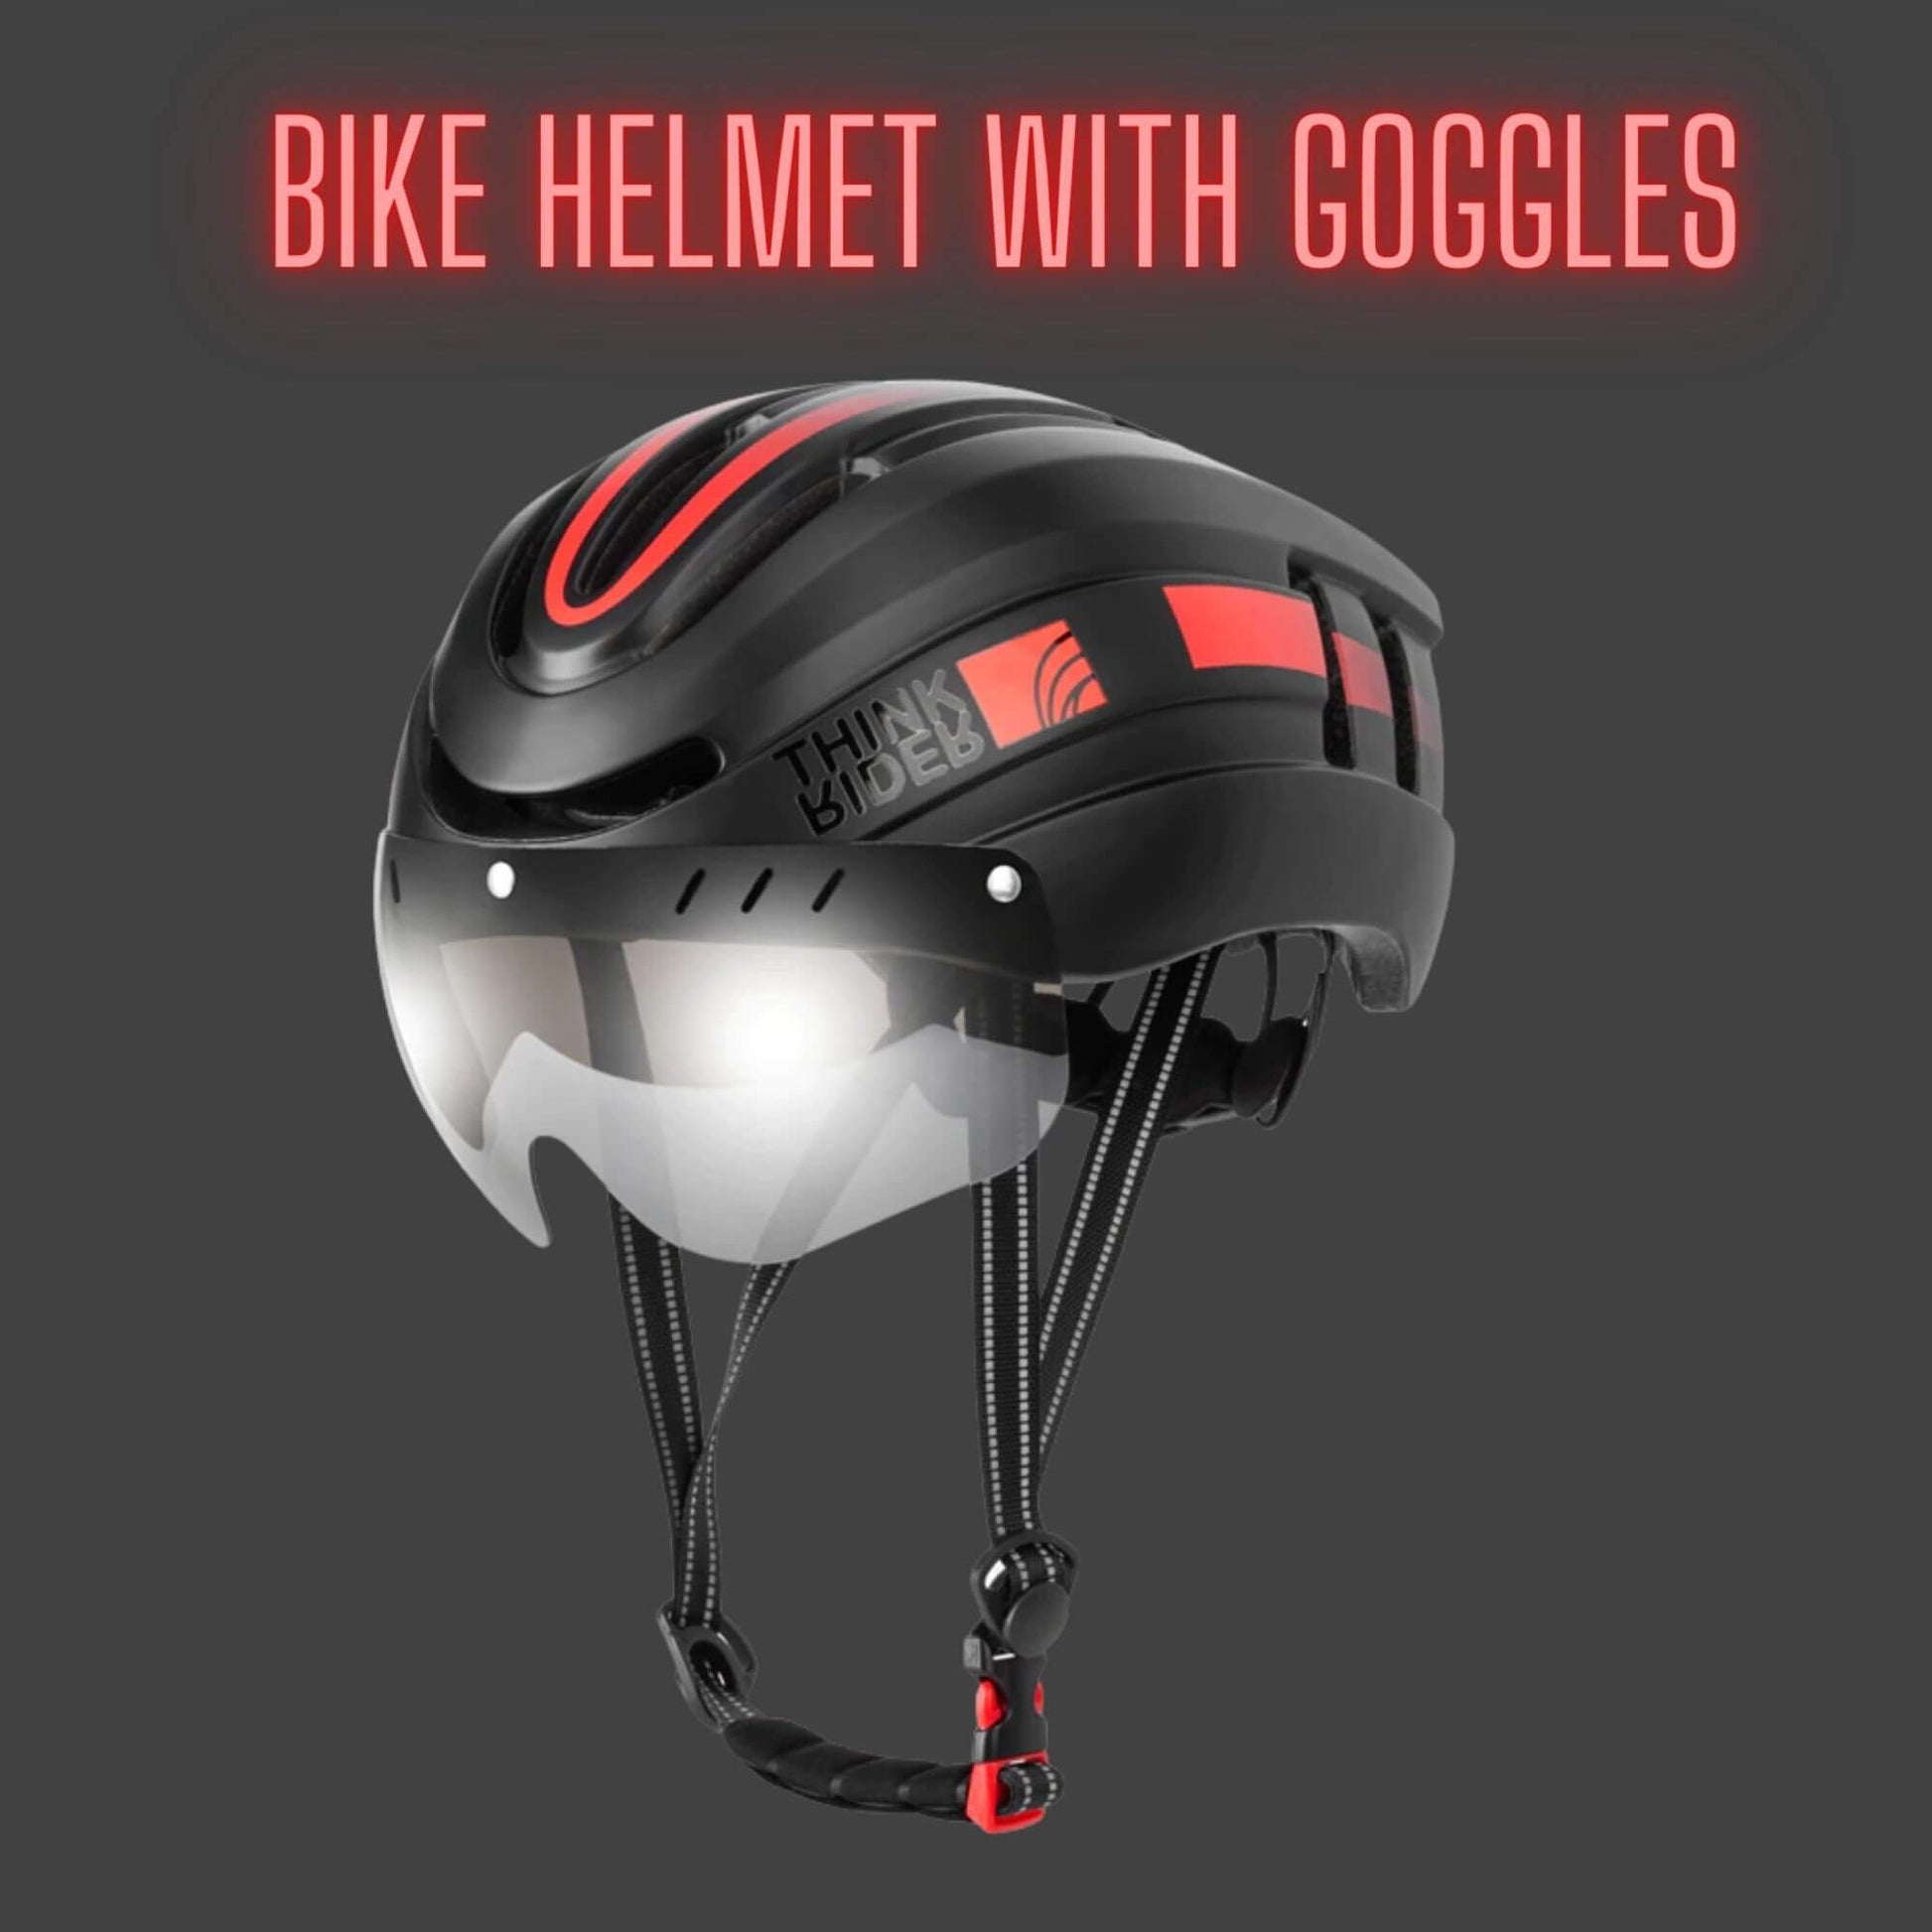 Bicaycle Helmet with goggles